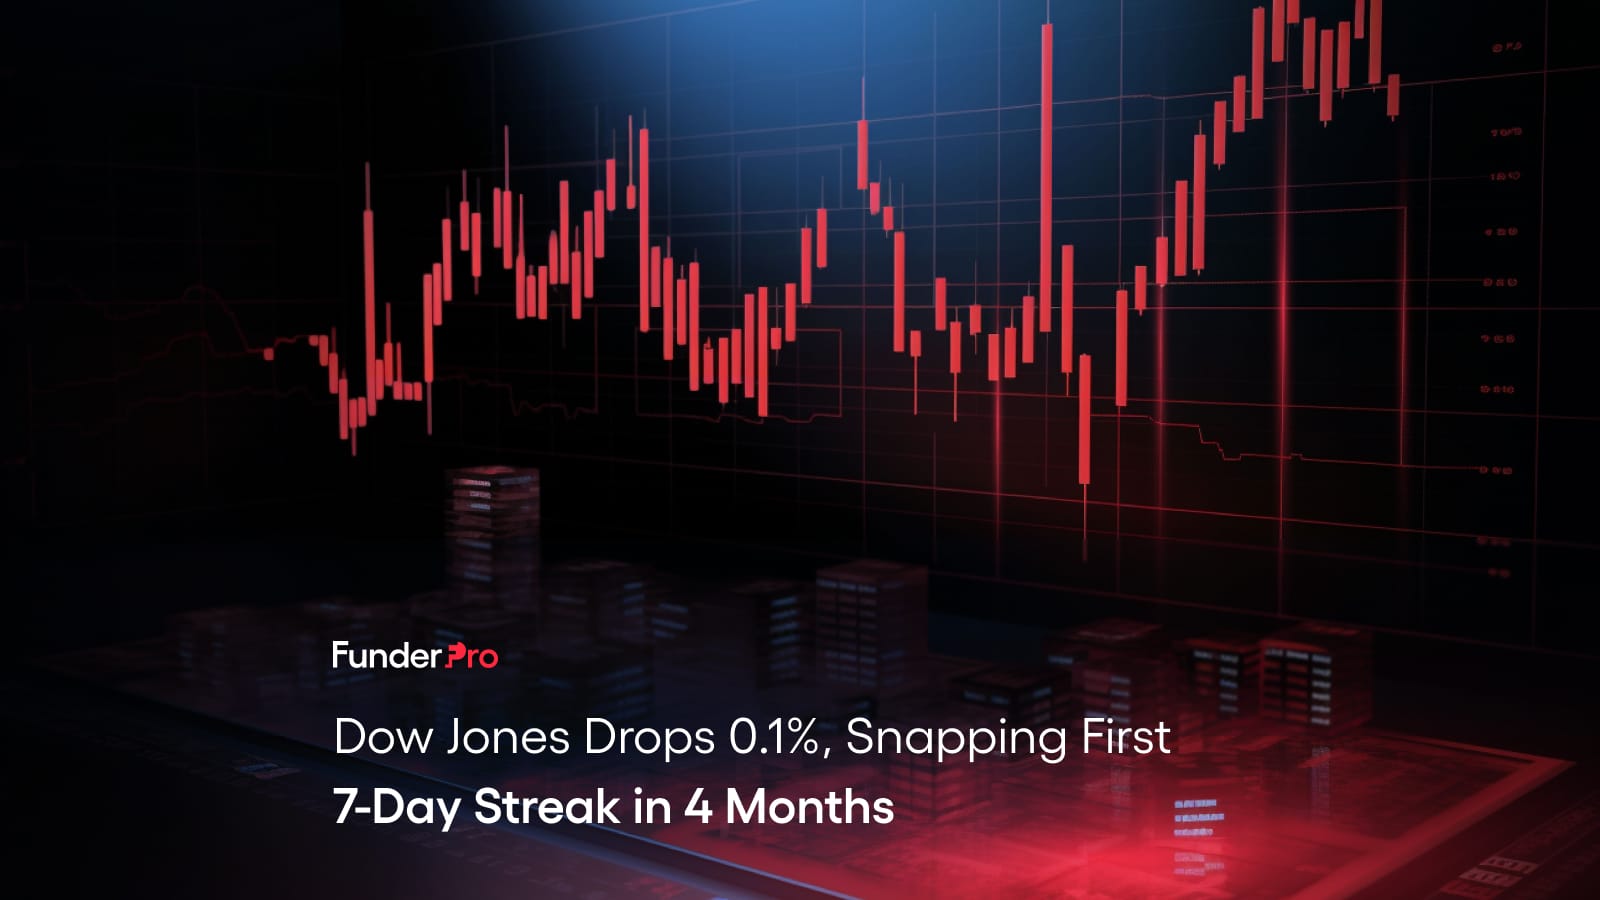 Dow Jones Drops 0.1%, Snapping First 7-Day Streak in 4 Months